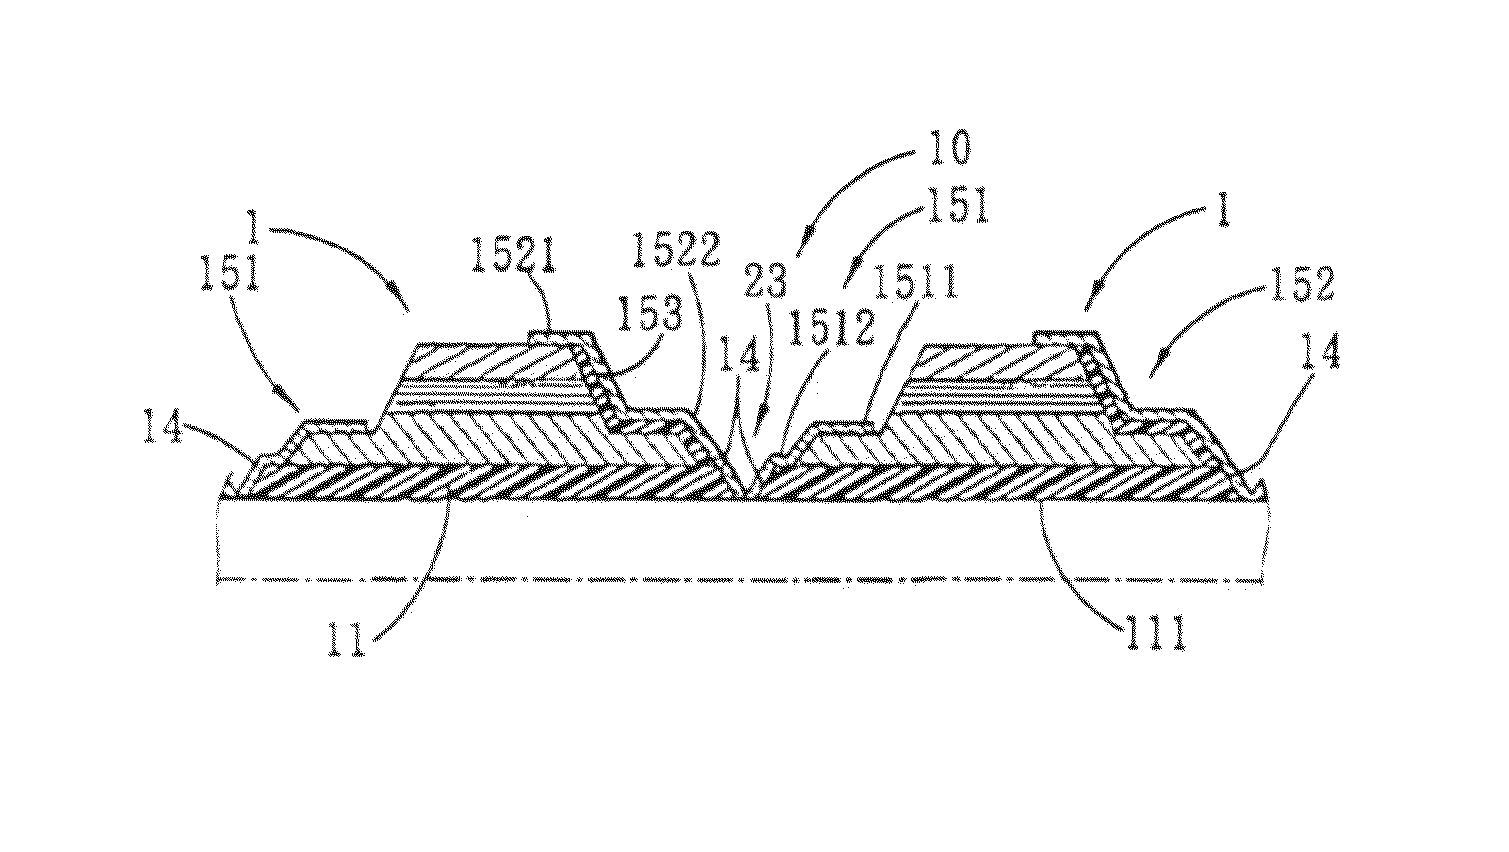 Light emitting diode chip, and methods for manufacturing and packaging the same